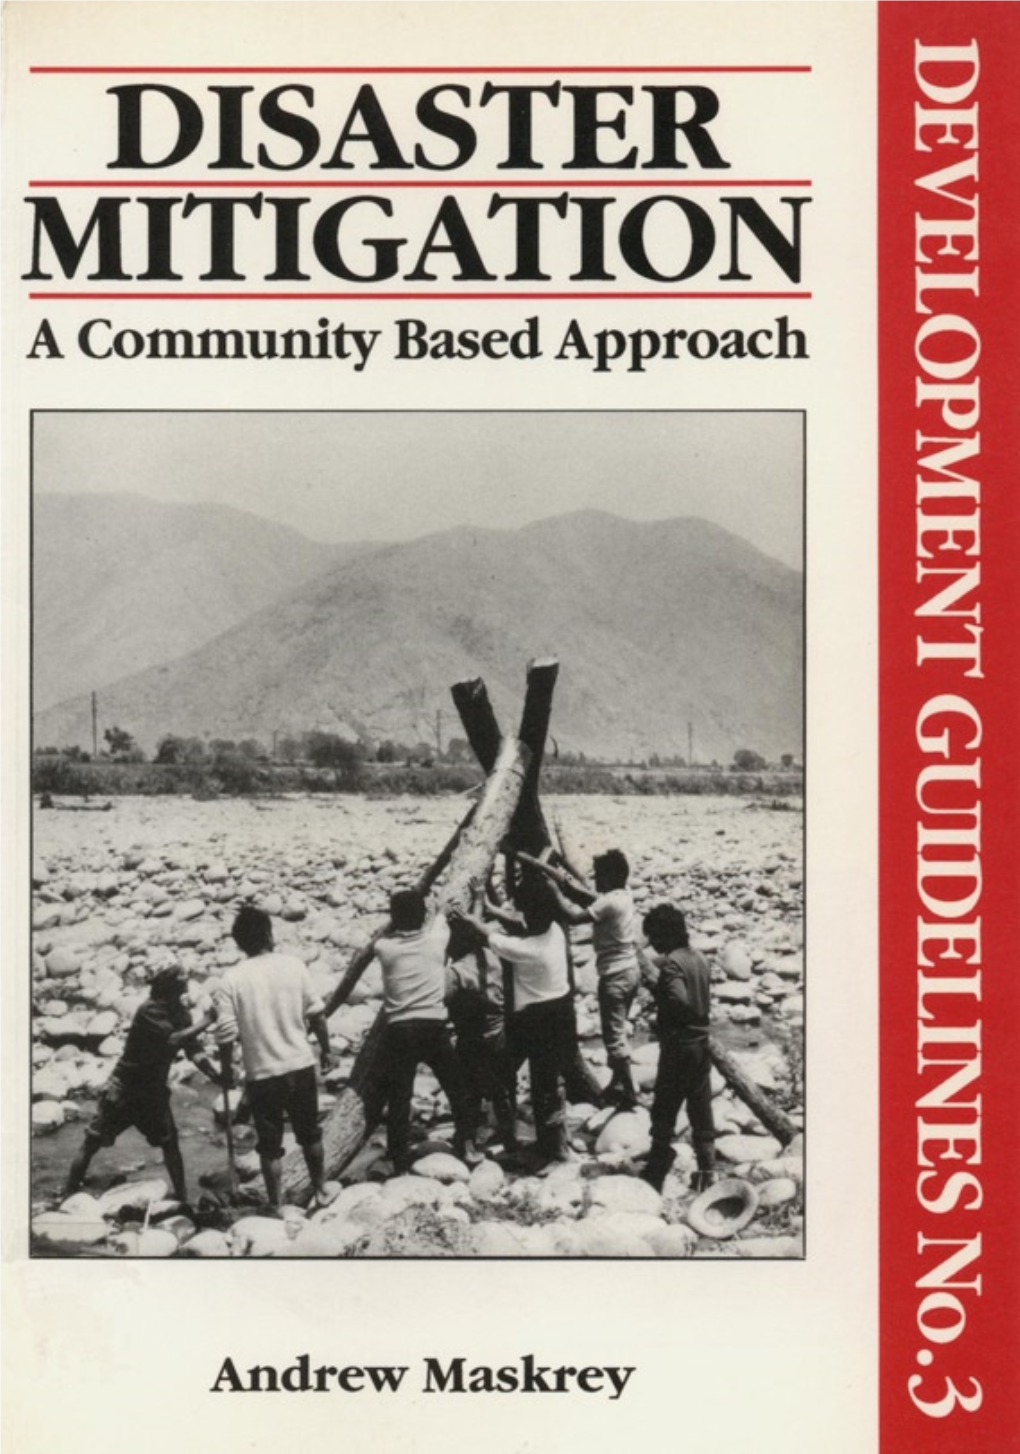 DISASTER MITIGATION a Community Based Approach